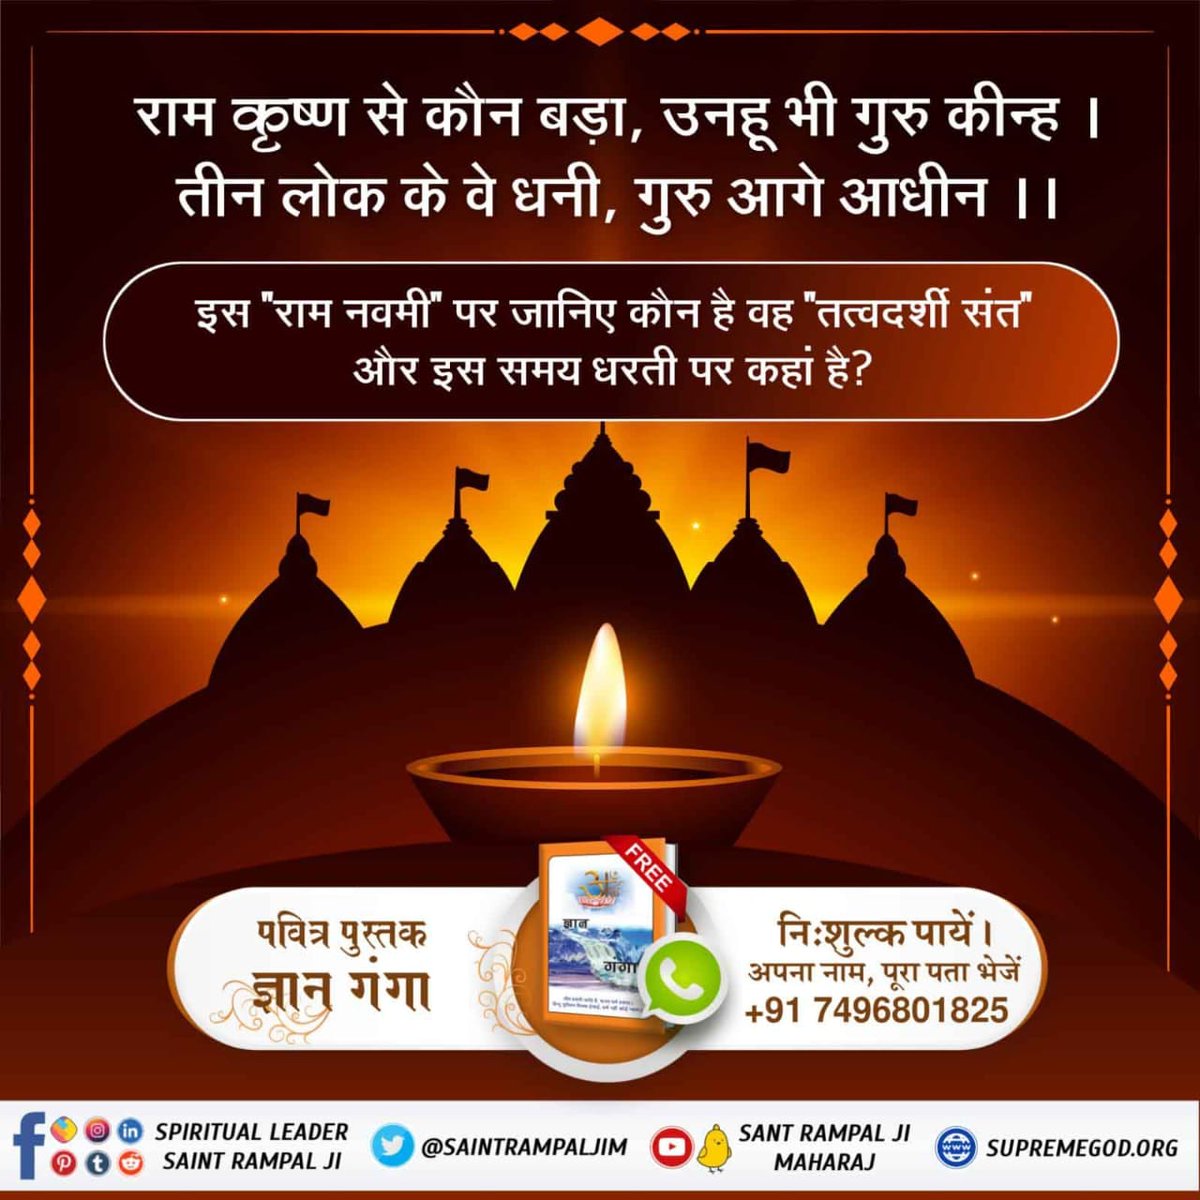 #ThursdayThoughts
#TuesdayFeeling
#TuesdayTips
💁🏻Must Watch
श्रद्धा MH - ONE CHANNEL 
02:00 pm (IST)